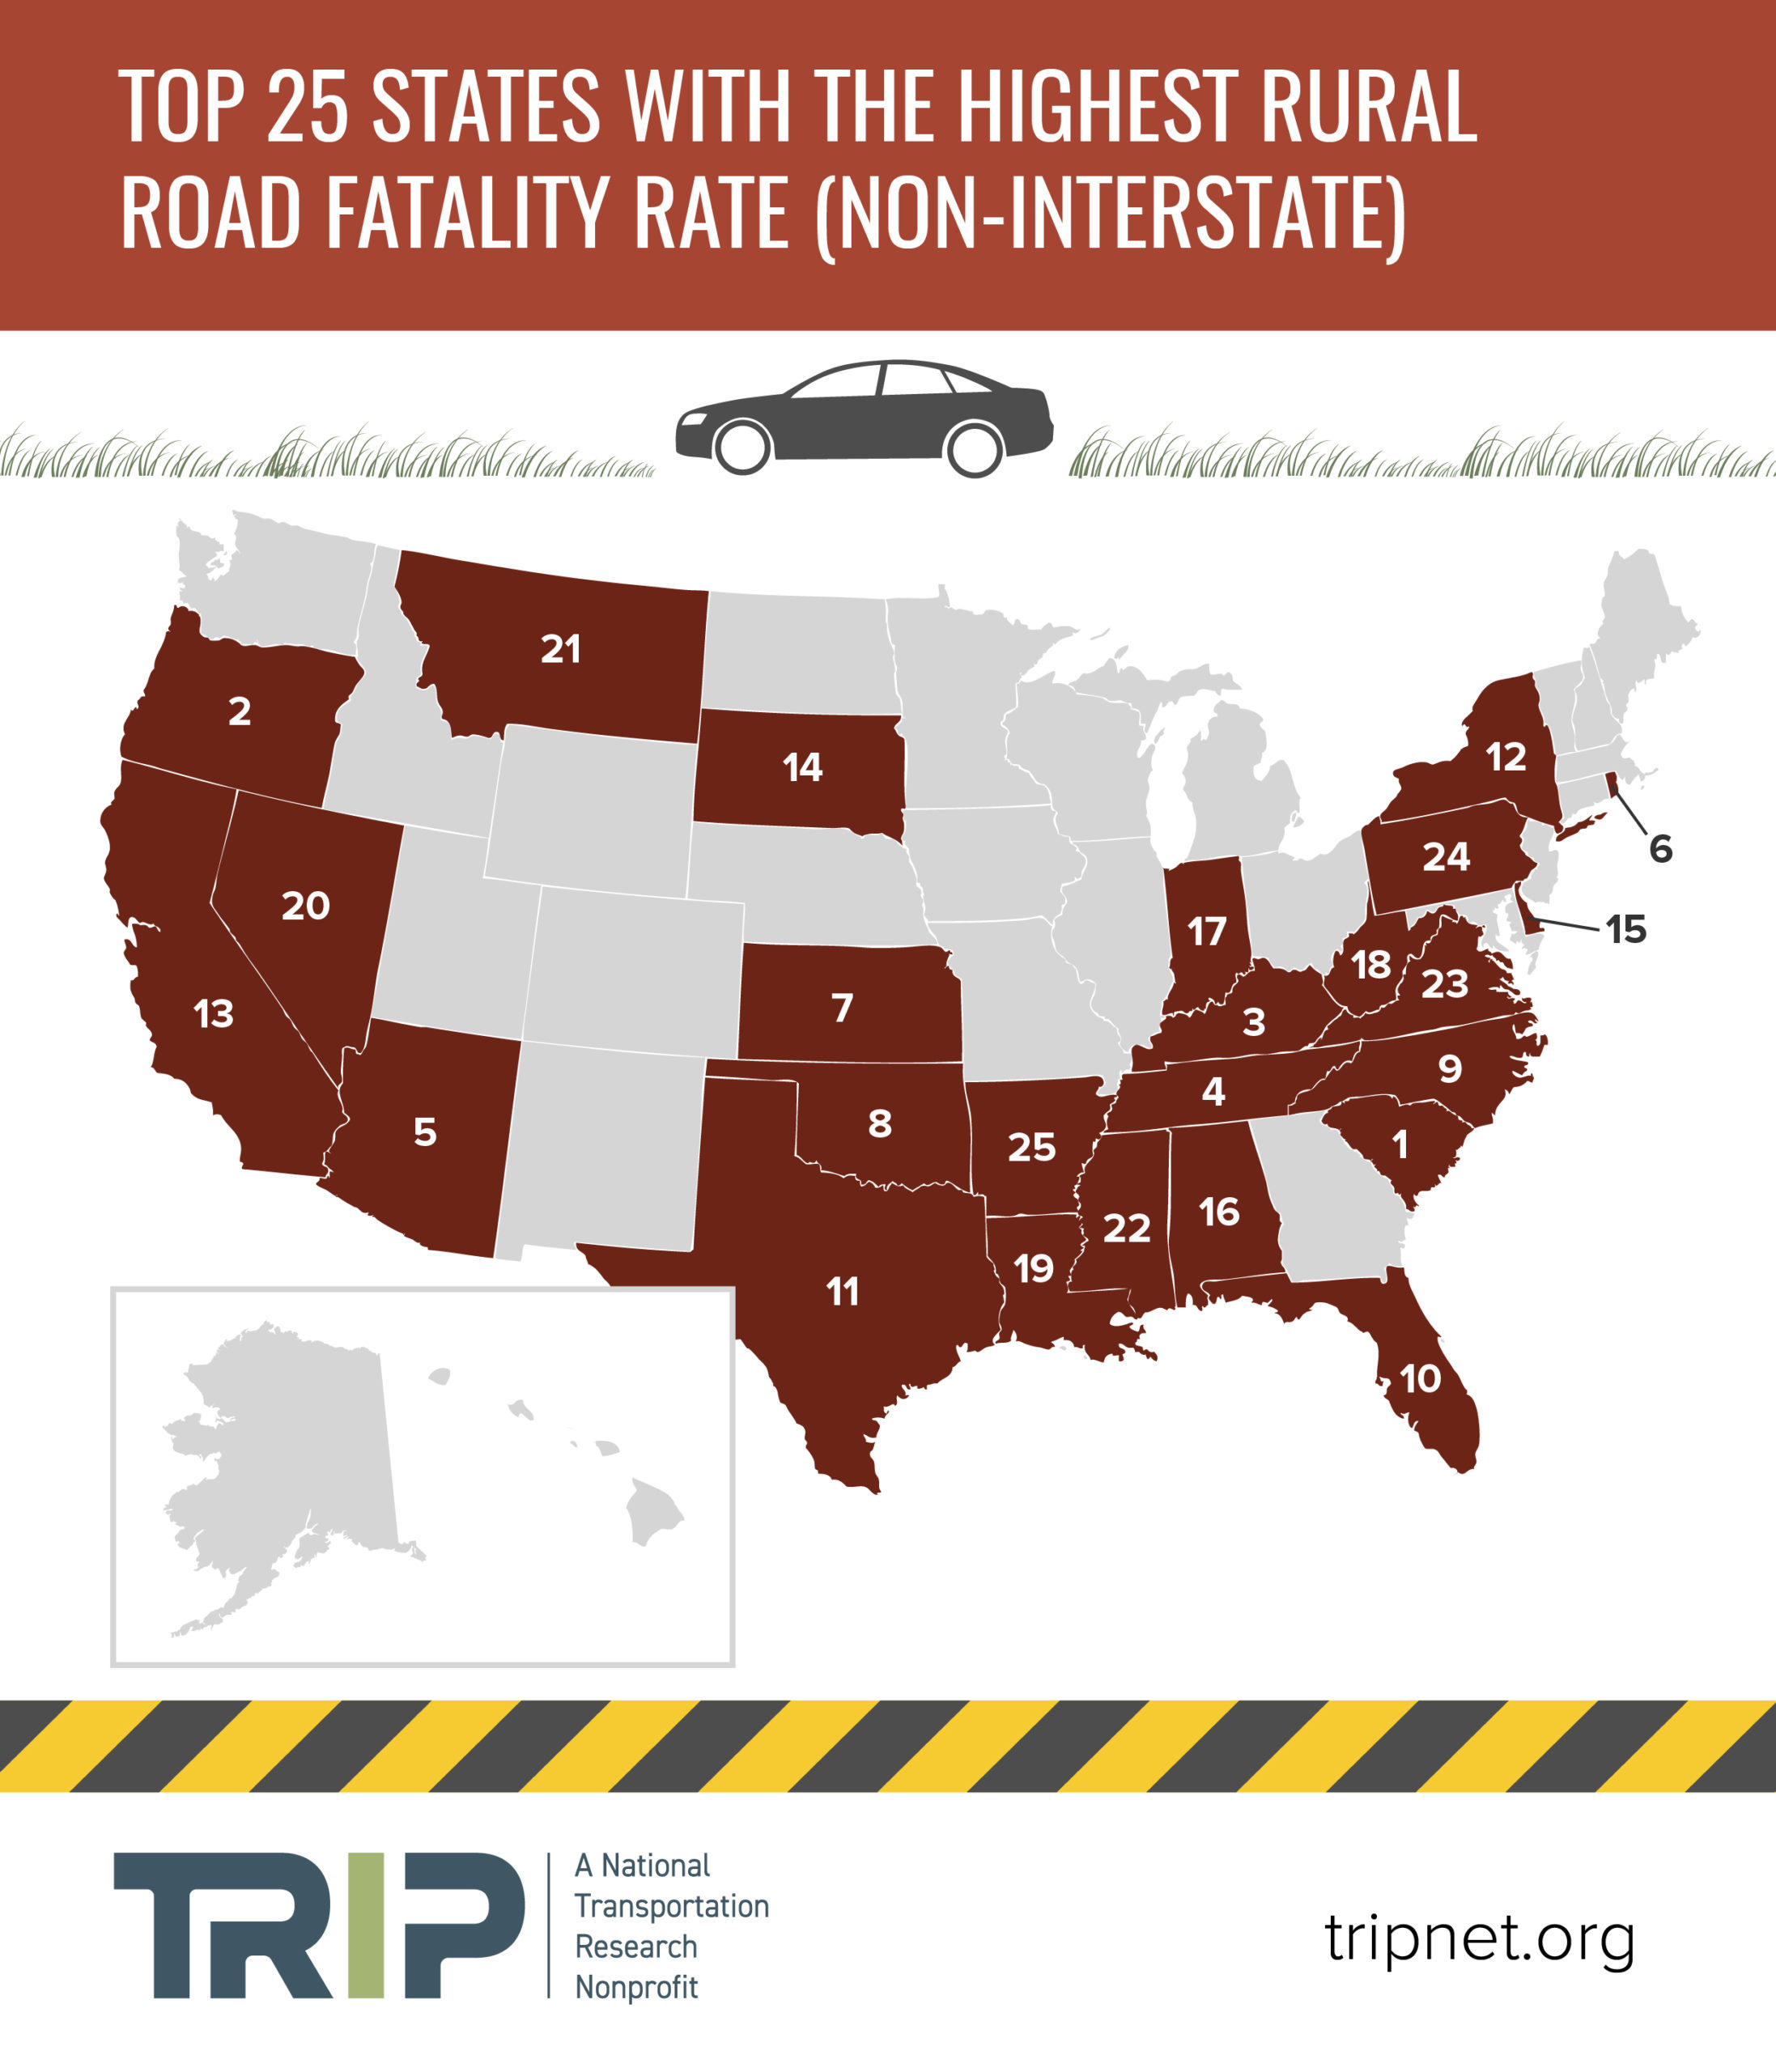 Rural Roads Report 2020: Top 25 States with the Highest Rural Road Fatality Rate (Non-Interstate) Infographic